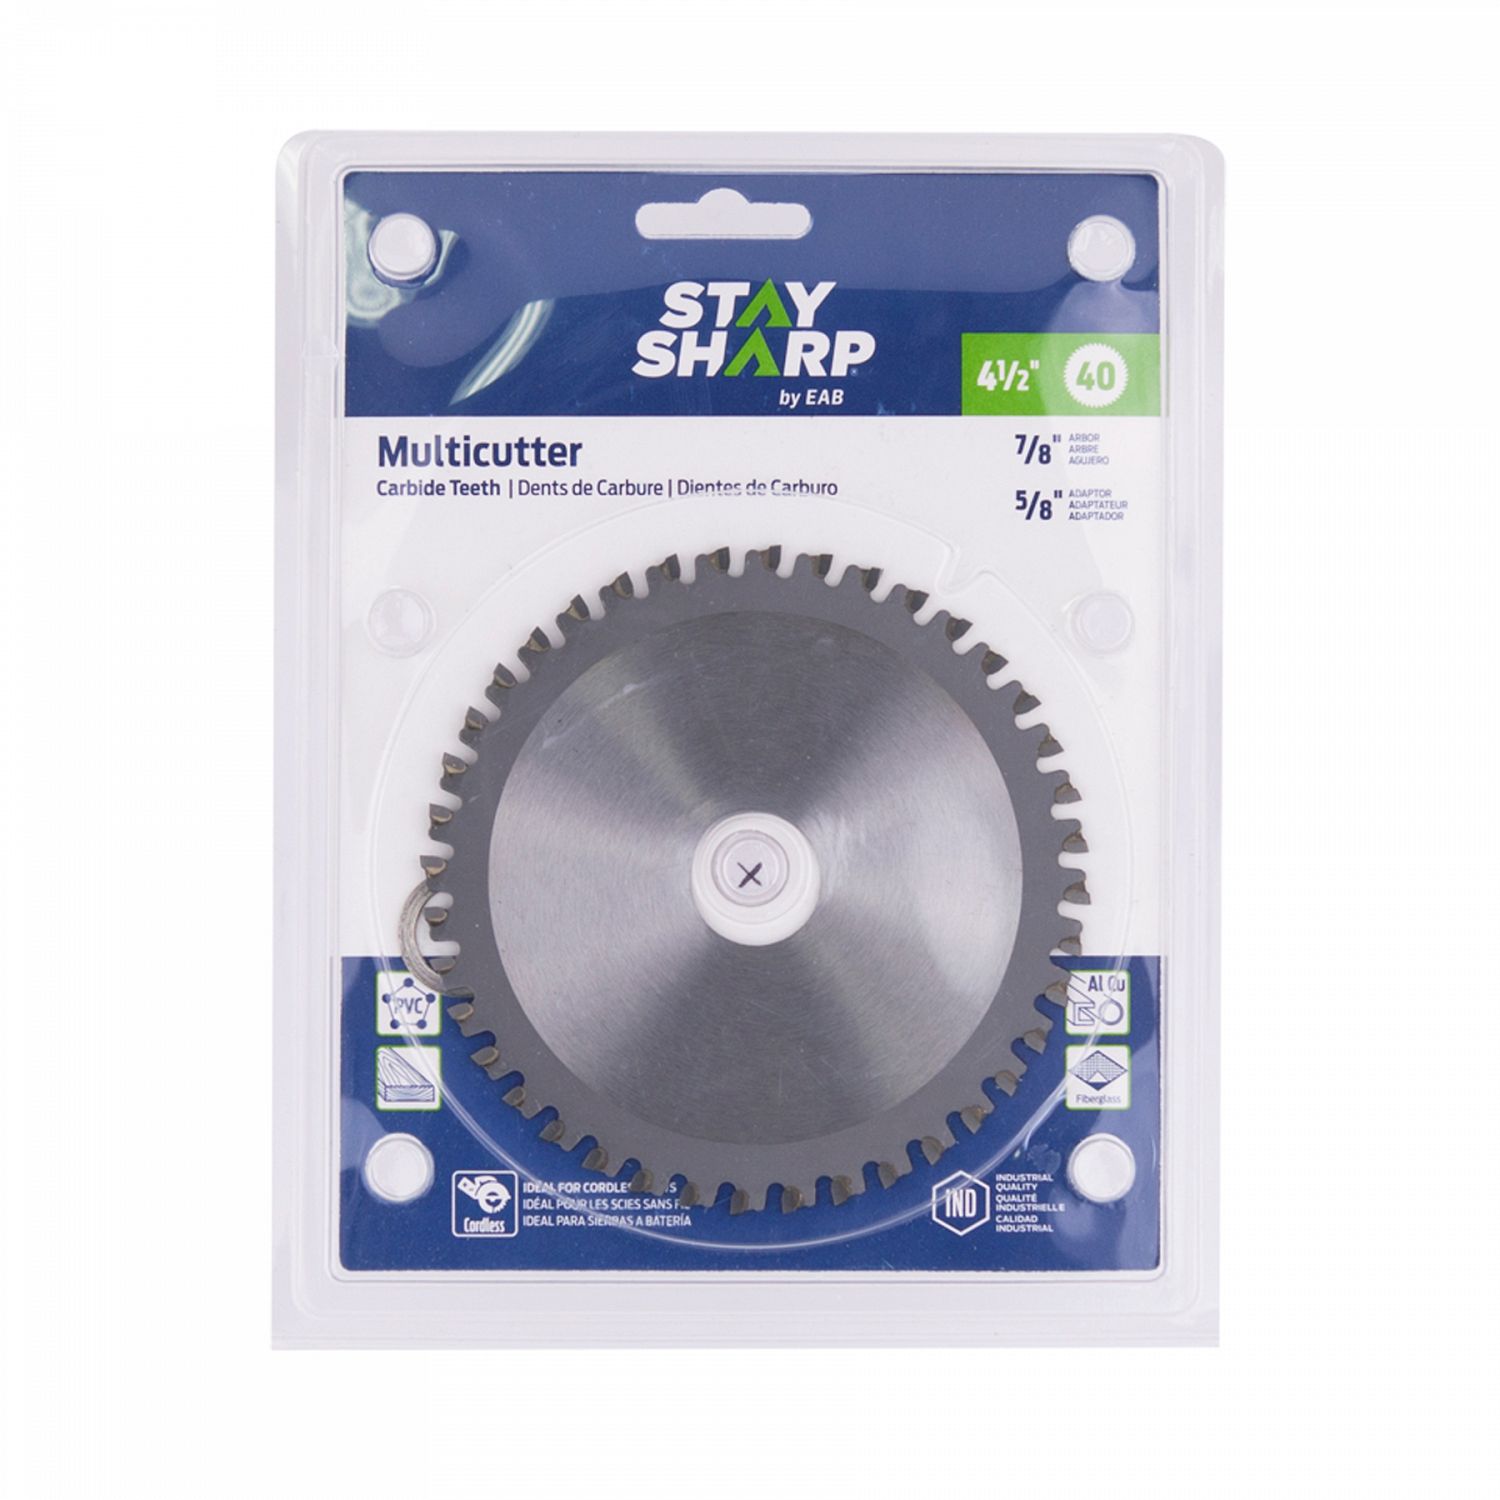 Saw Blades Finishing Specialty 4 1/2, Stay Sharp®